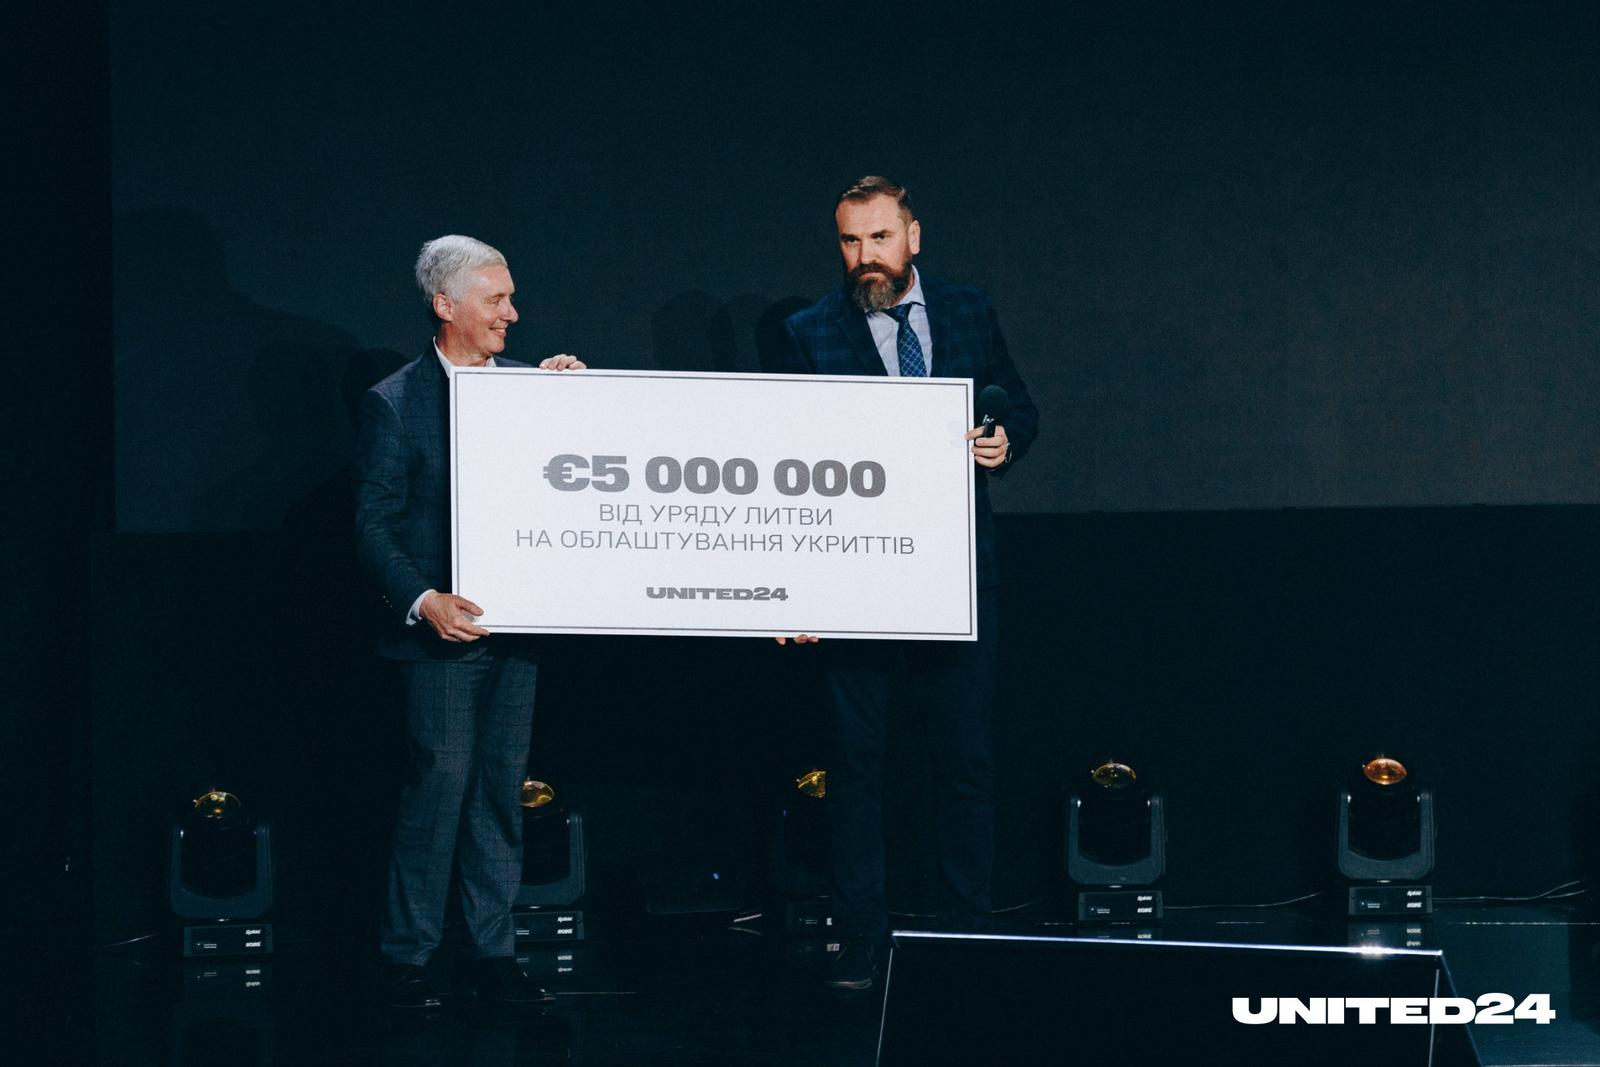 5,000,000 euros from the Lithuanian government to equip shelters in Ukrainian schools! 